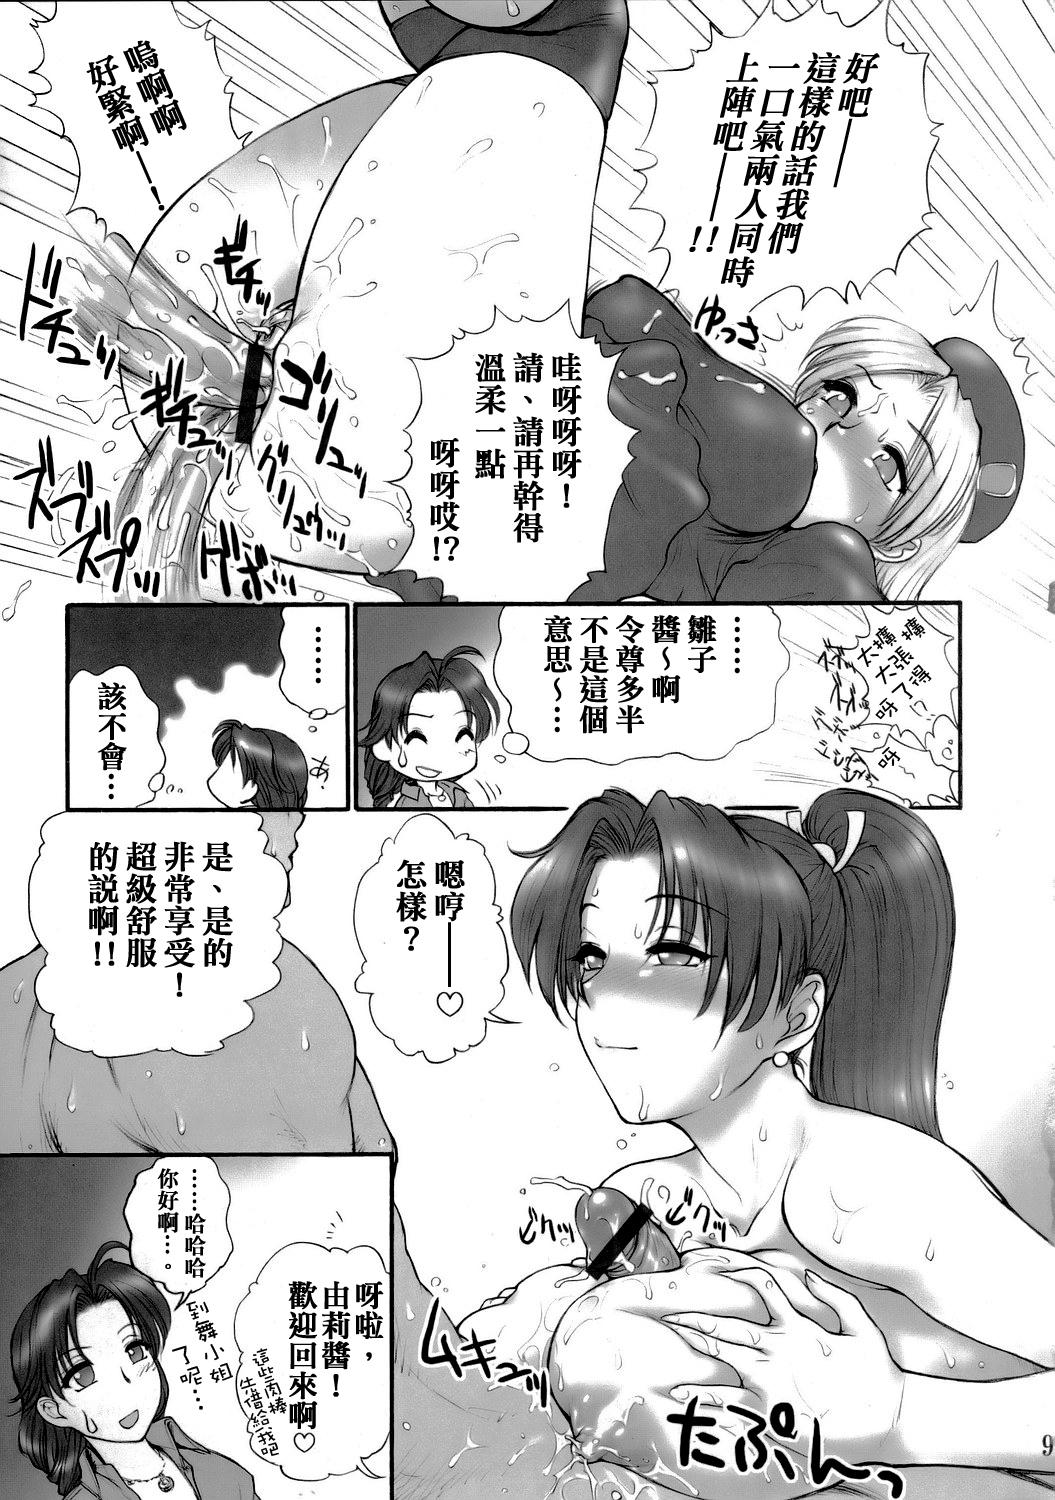 Hardcorend (SC29) [Shinnihon Pepsitou (St. Germain-sal)] Report Concerning Kyoku-gen-ryuu (The King of Fighters) [Chinese] [日祈漢化] - King of fighters Jerk - Page 11